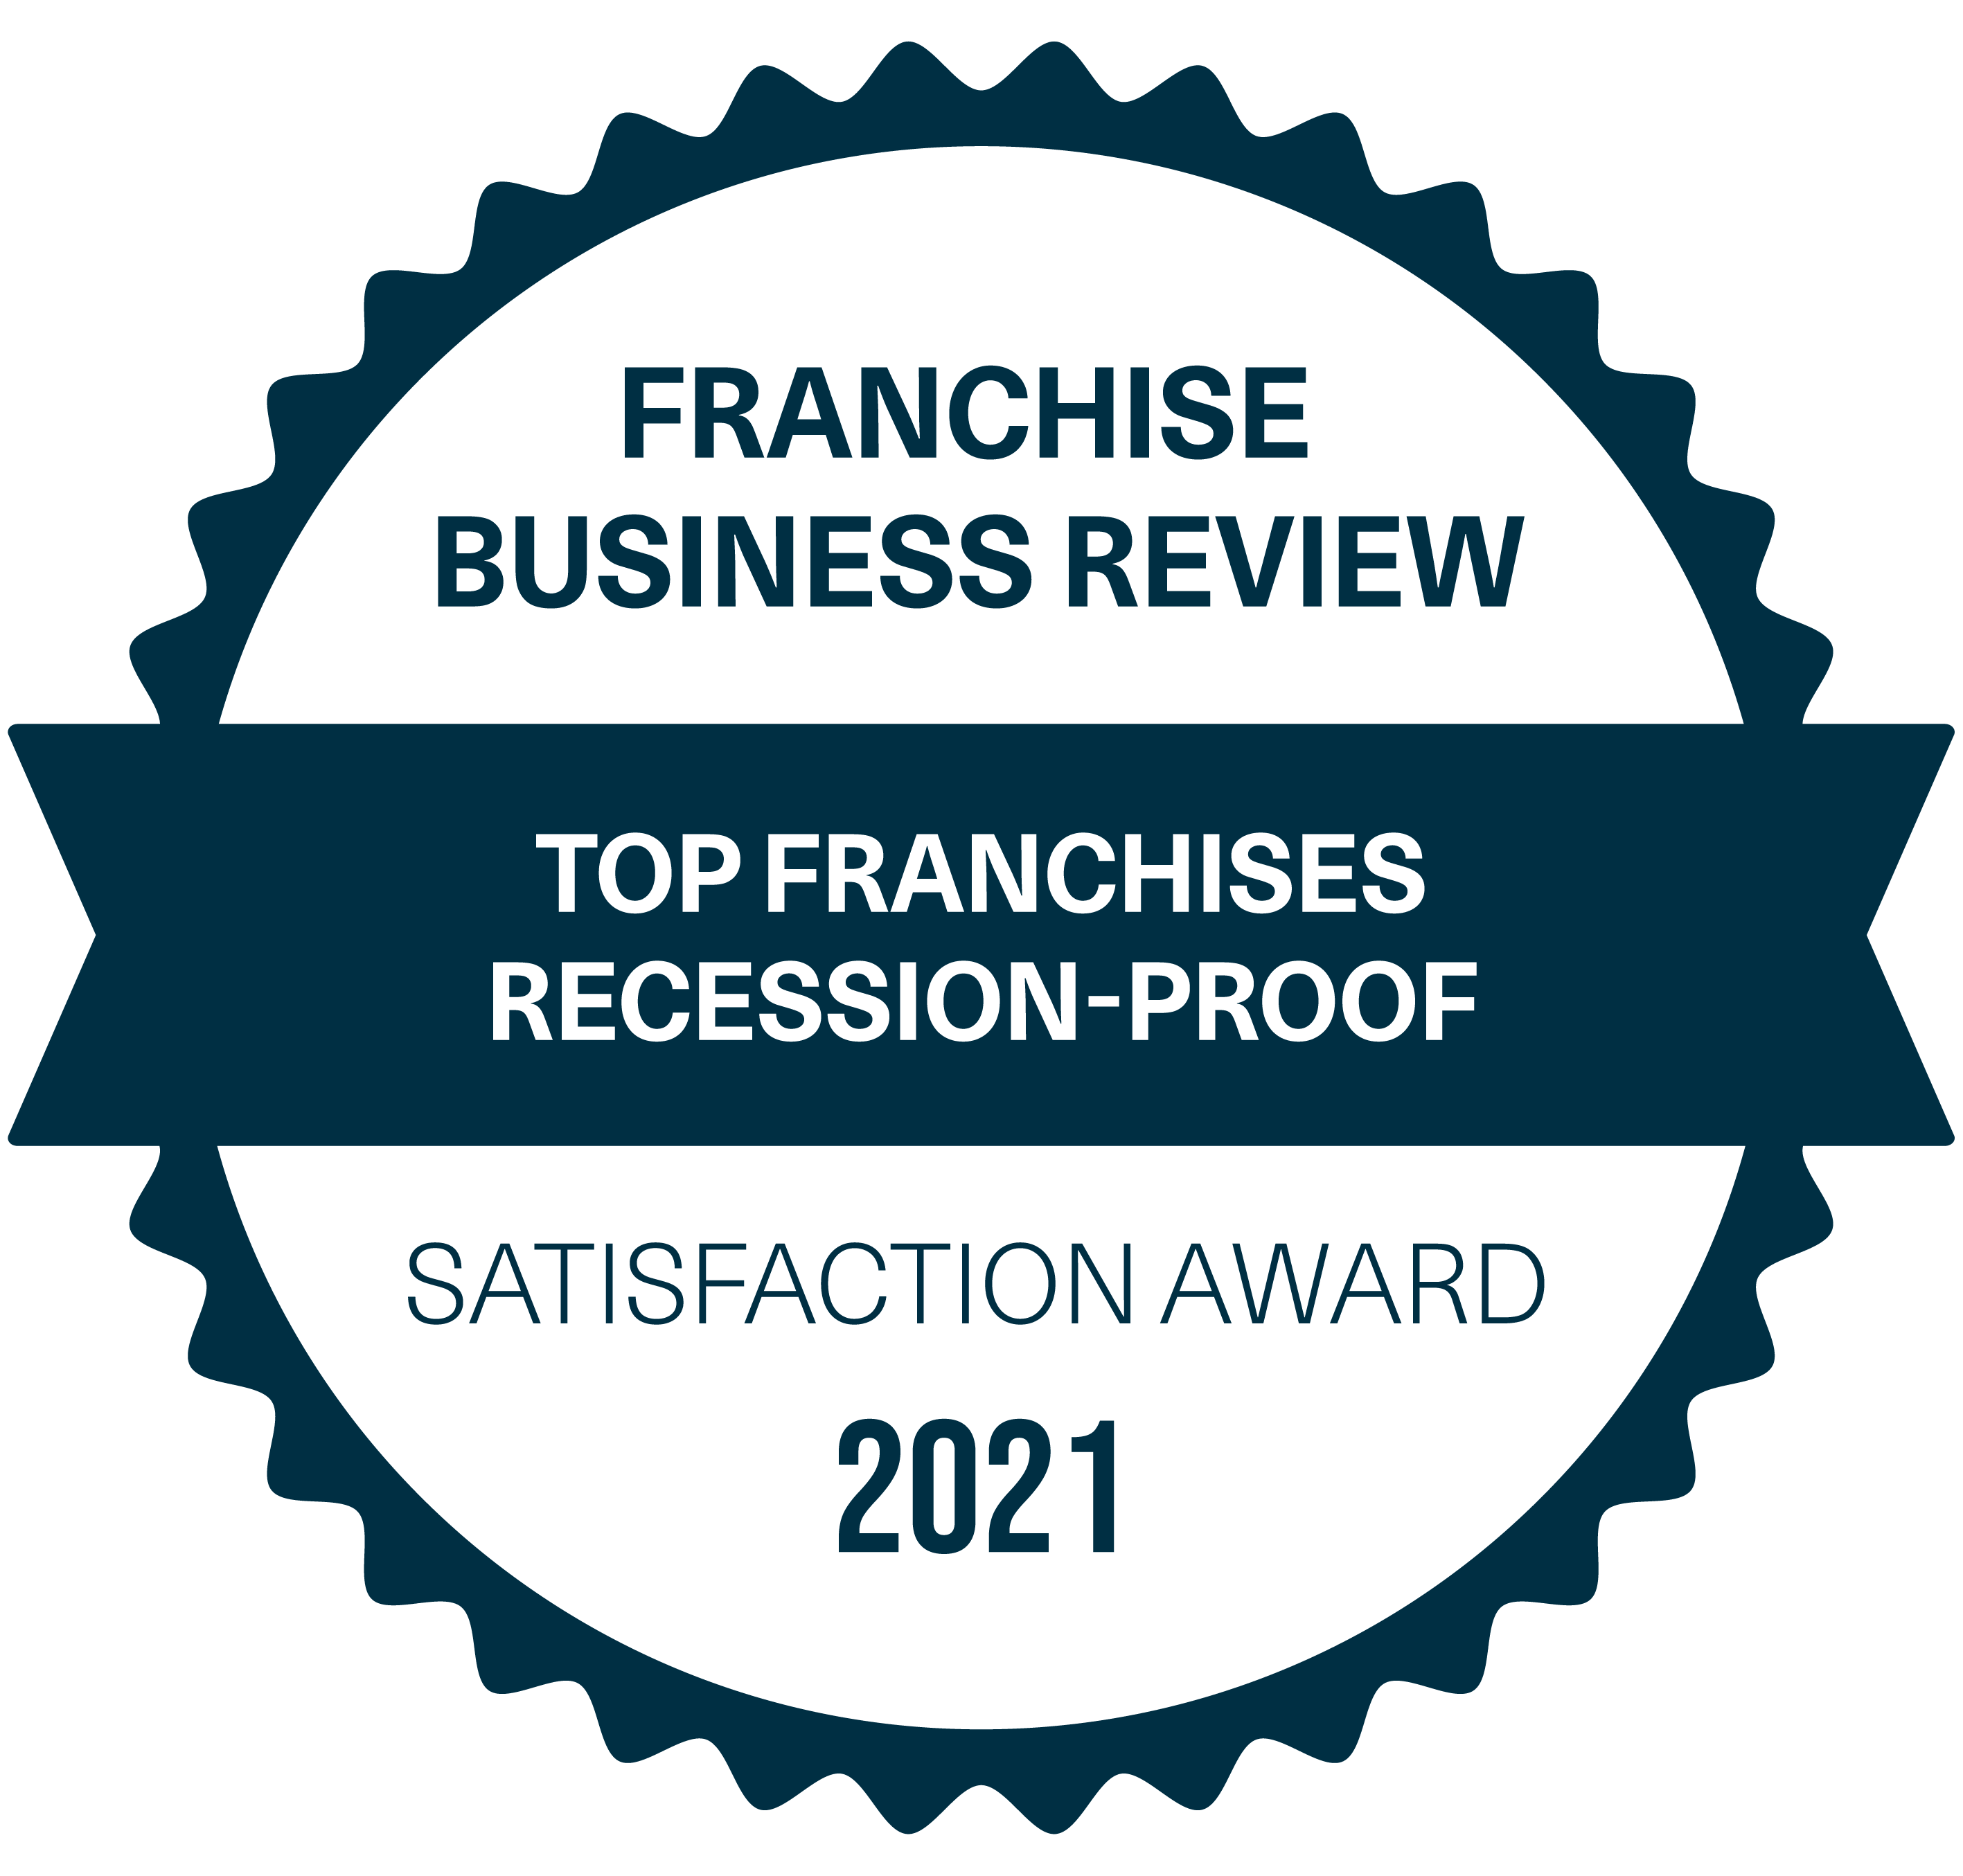 Top Franchises 2021 Recession Proof Satisfaction Award from Franchise Business Review badge